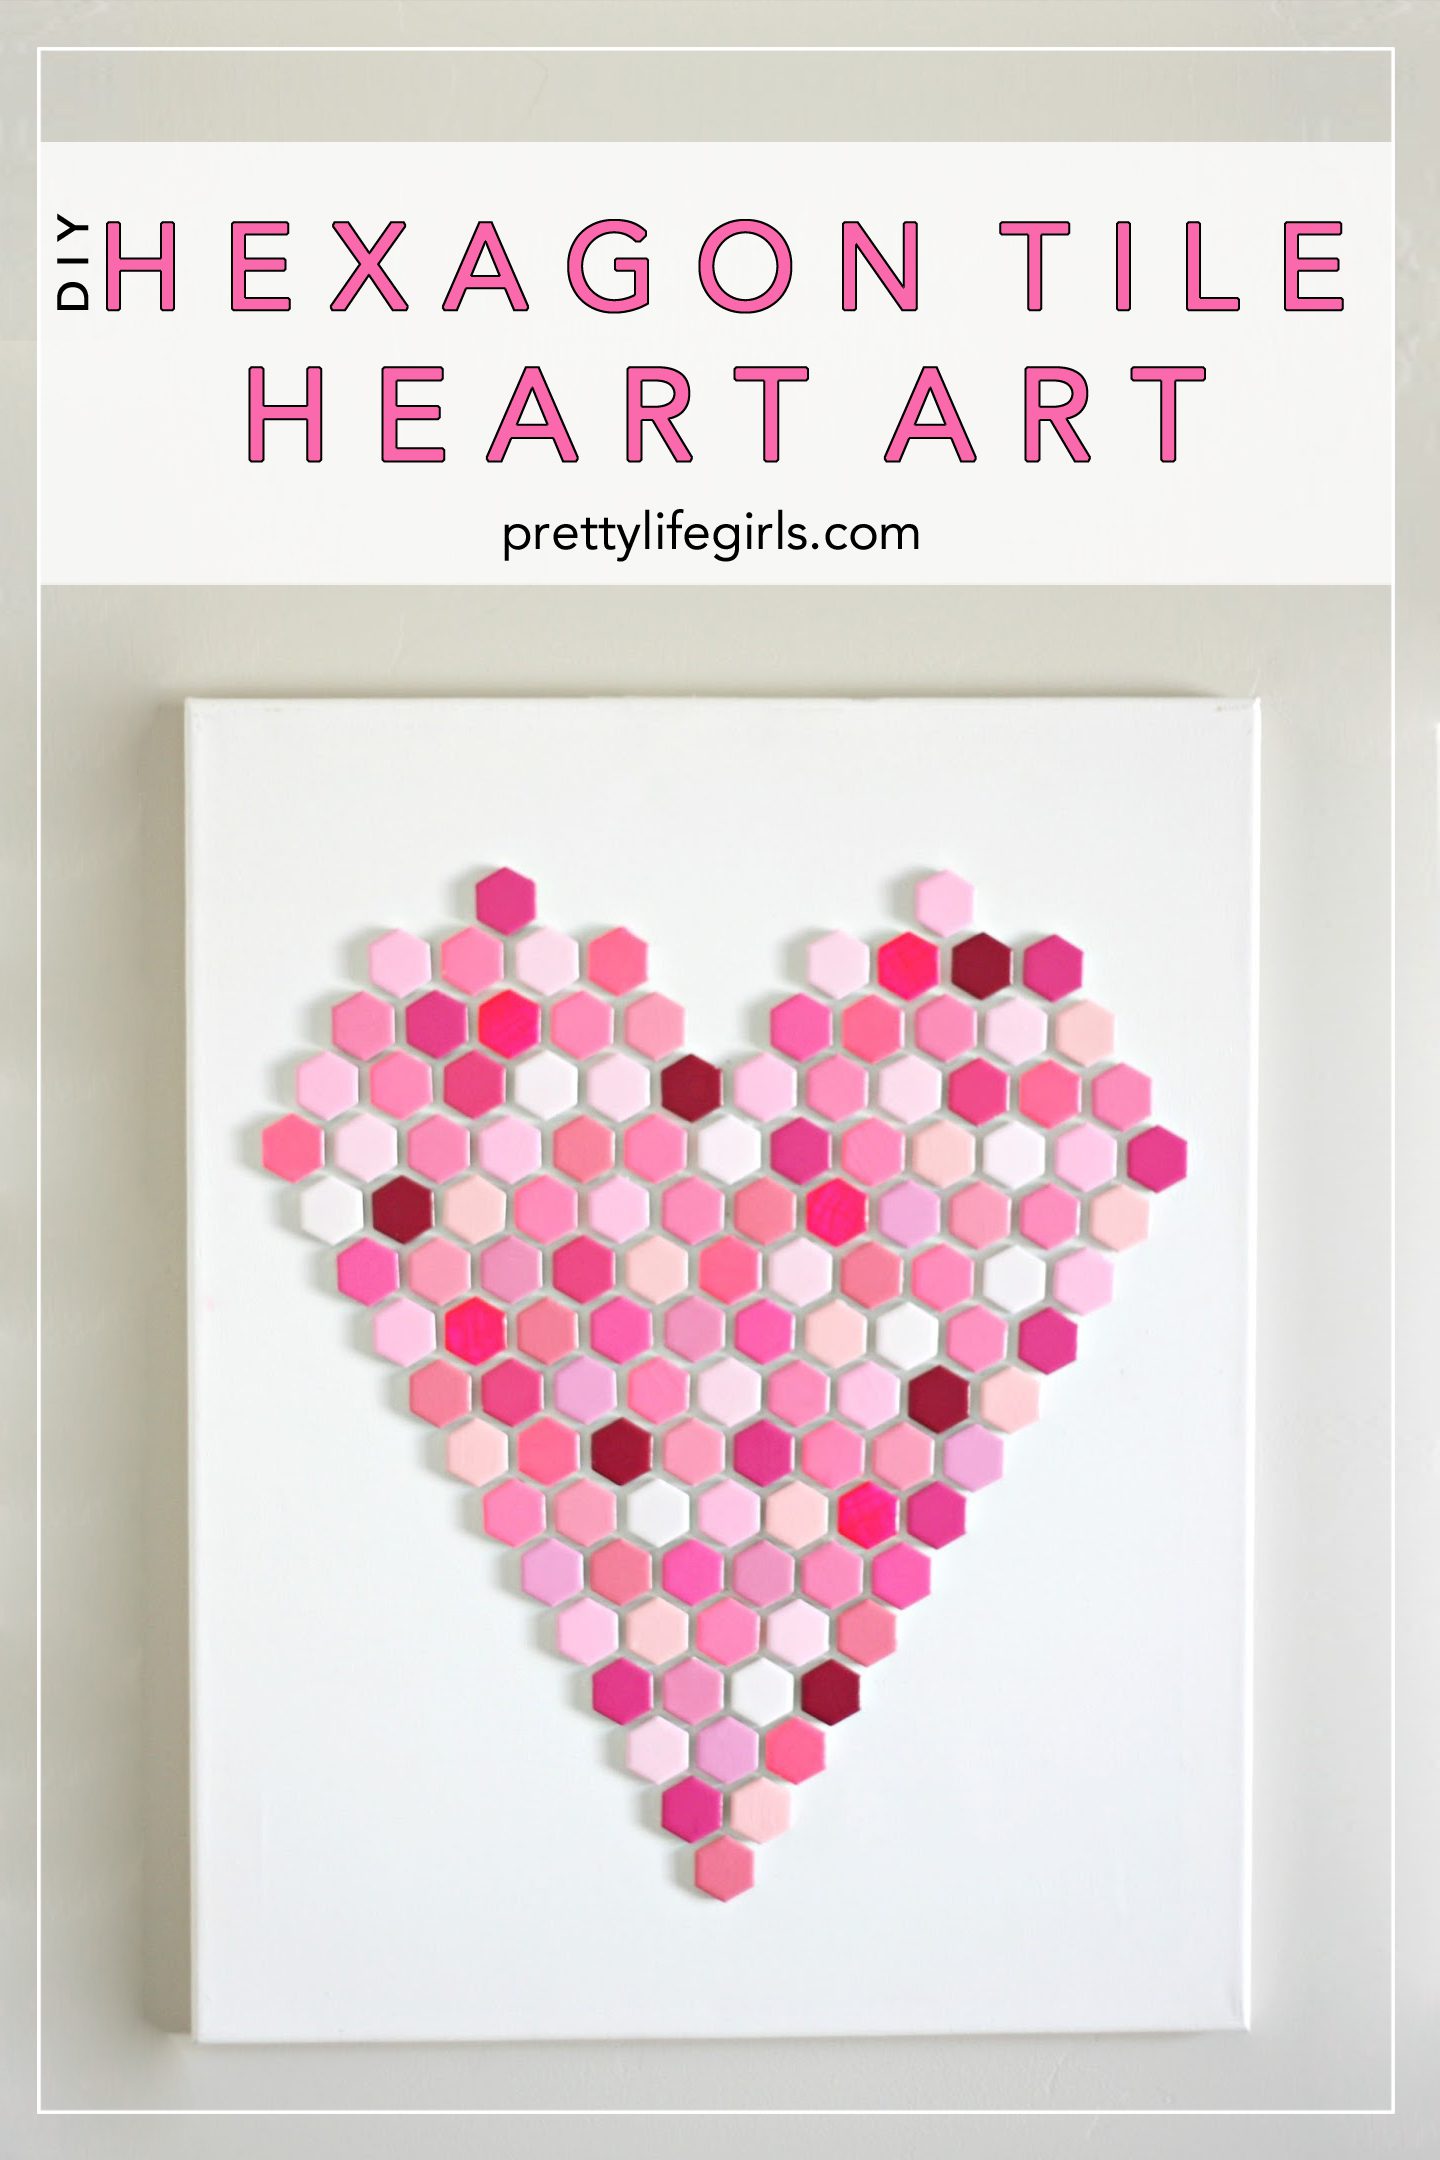 15 Lovely Handmade Valentine Gifts + featured by Top US Craft Blog + The Pretty Life Girls: + DIY Hexagon Tile Heart Art